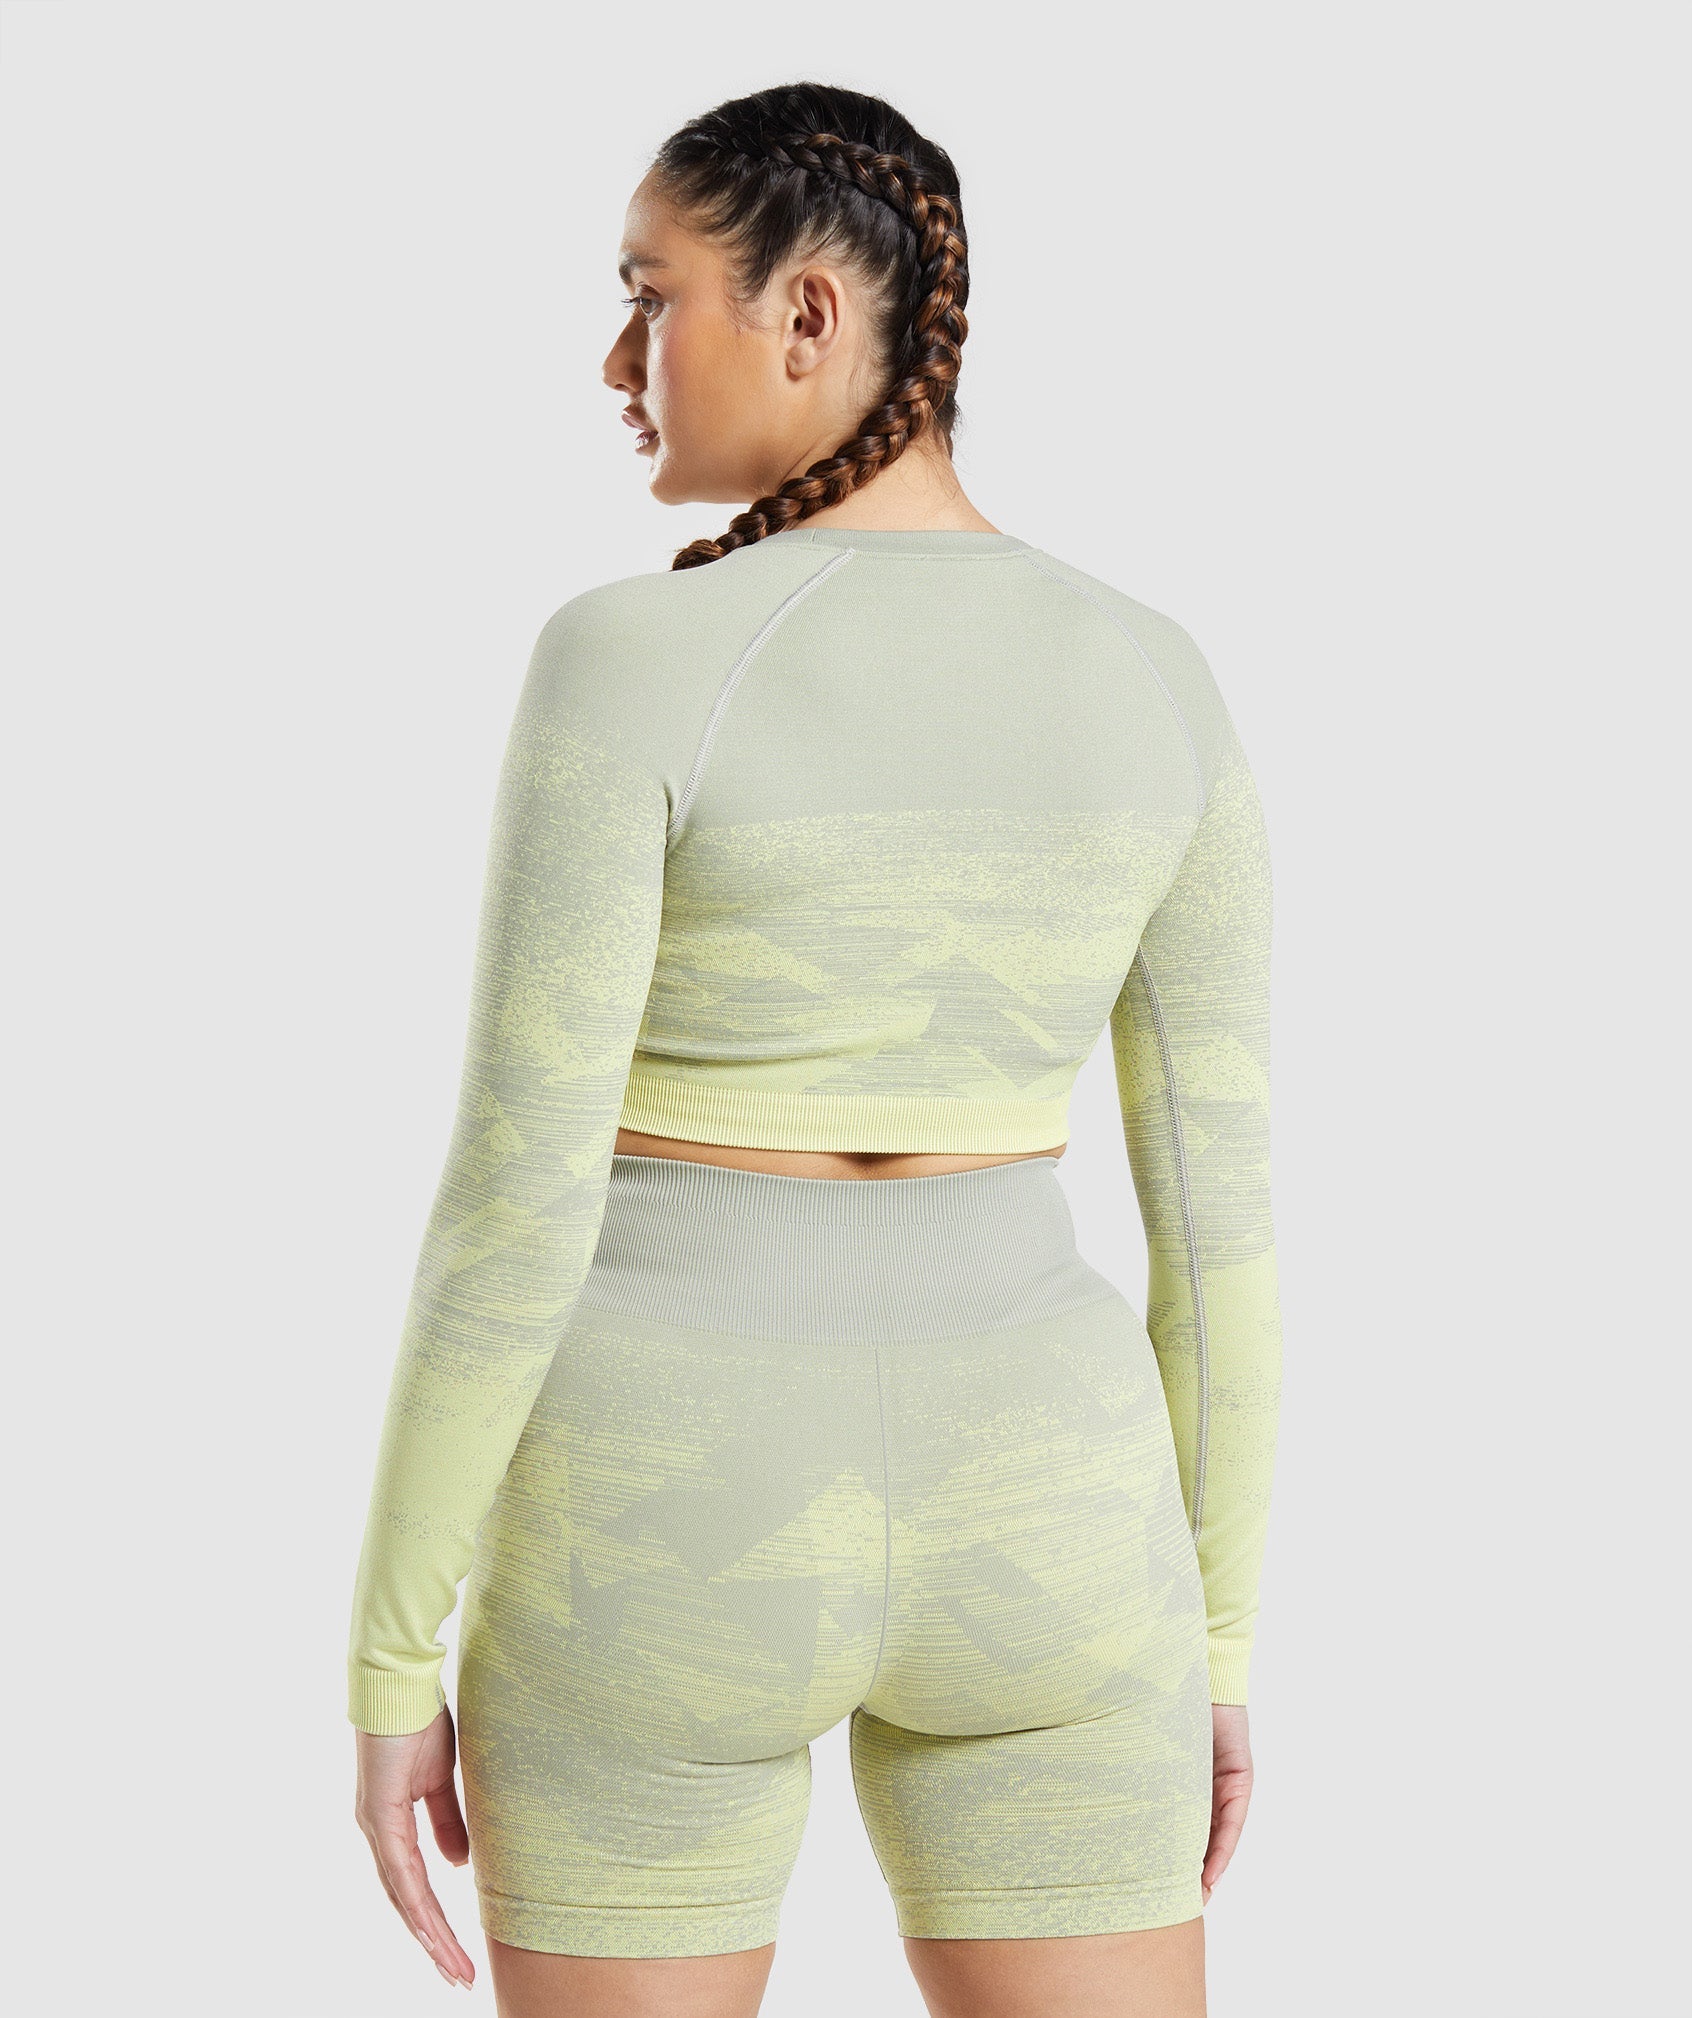 Adapt Ombre Crop Top in Triangle | Taupe Grey - view 3